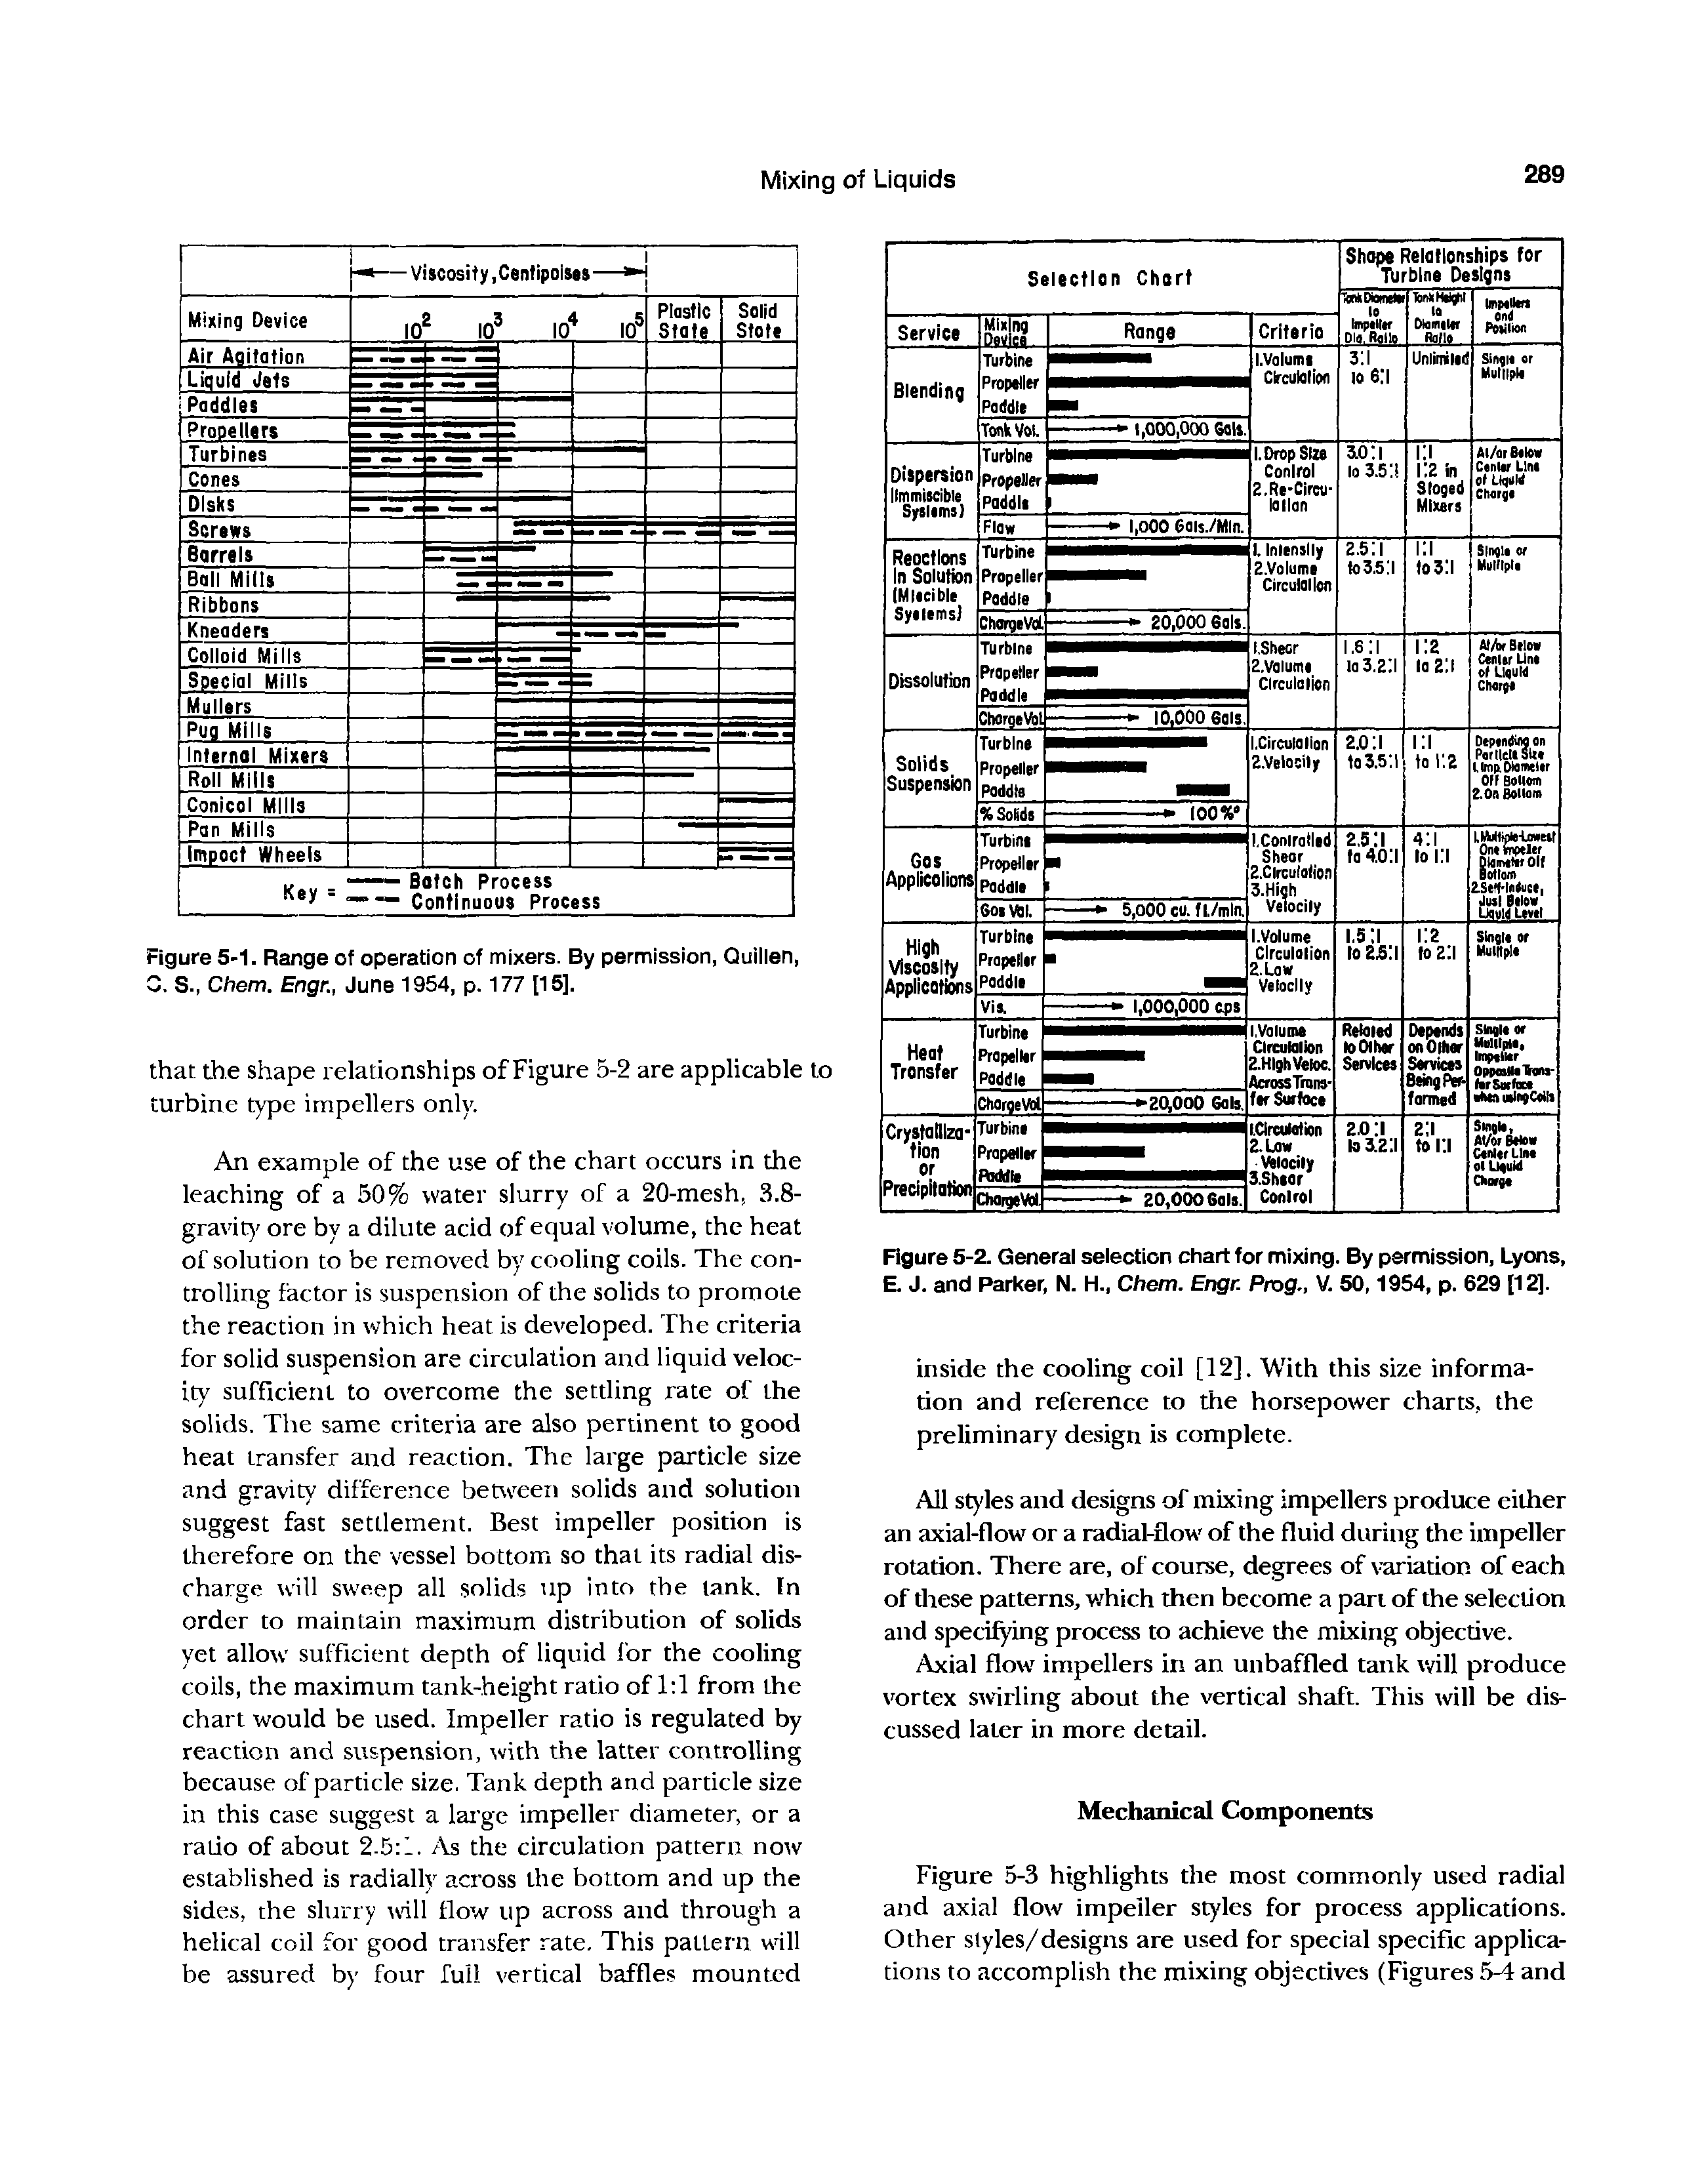 Figure 5-2. General selection chart for mixing. By permission, Lyons, E. J. and Parker, N. H., Chem. Engr. Prog., V. 50,1954, p. 629 [12].